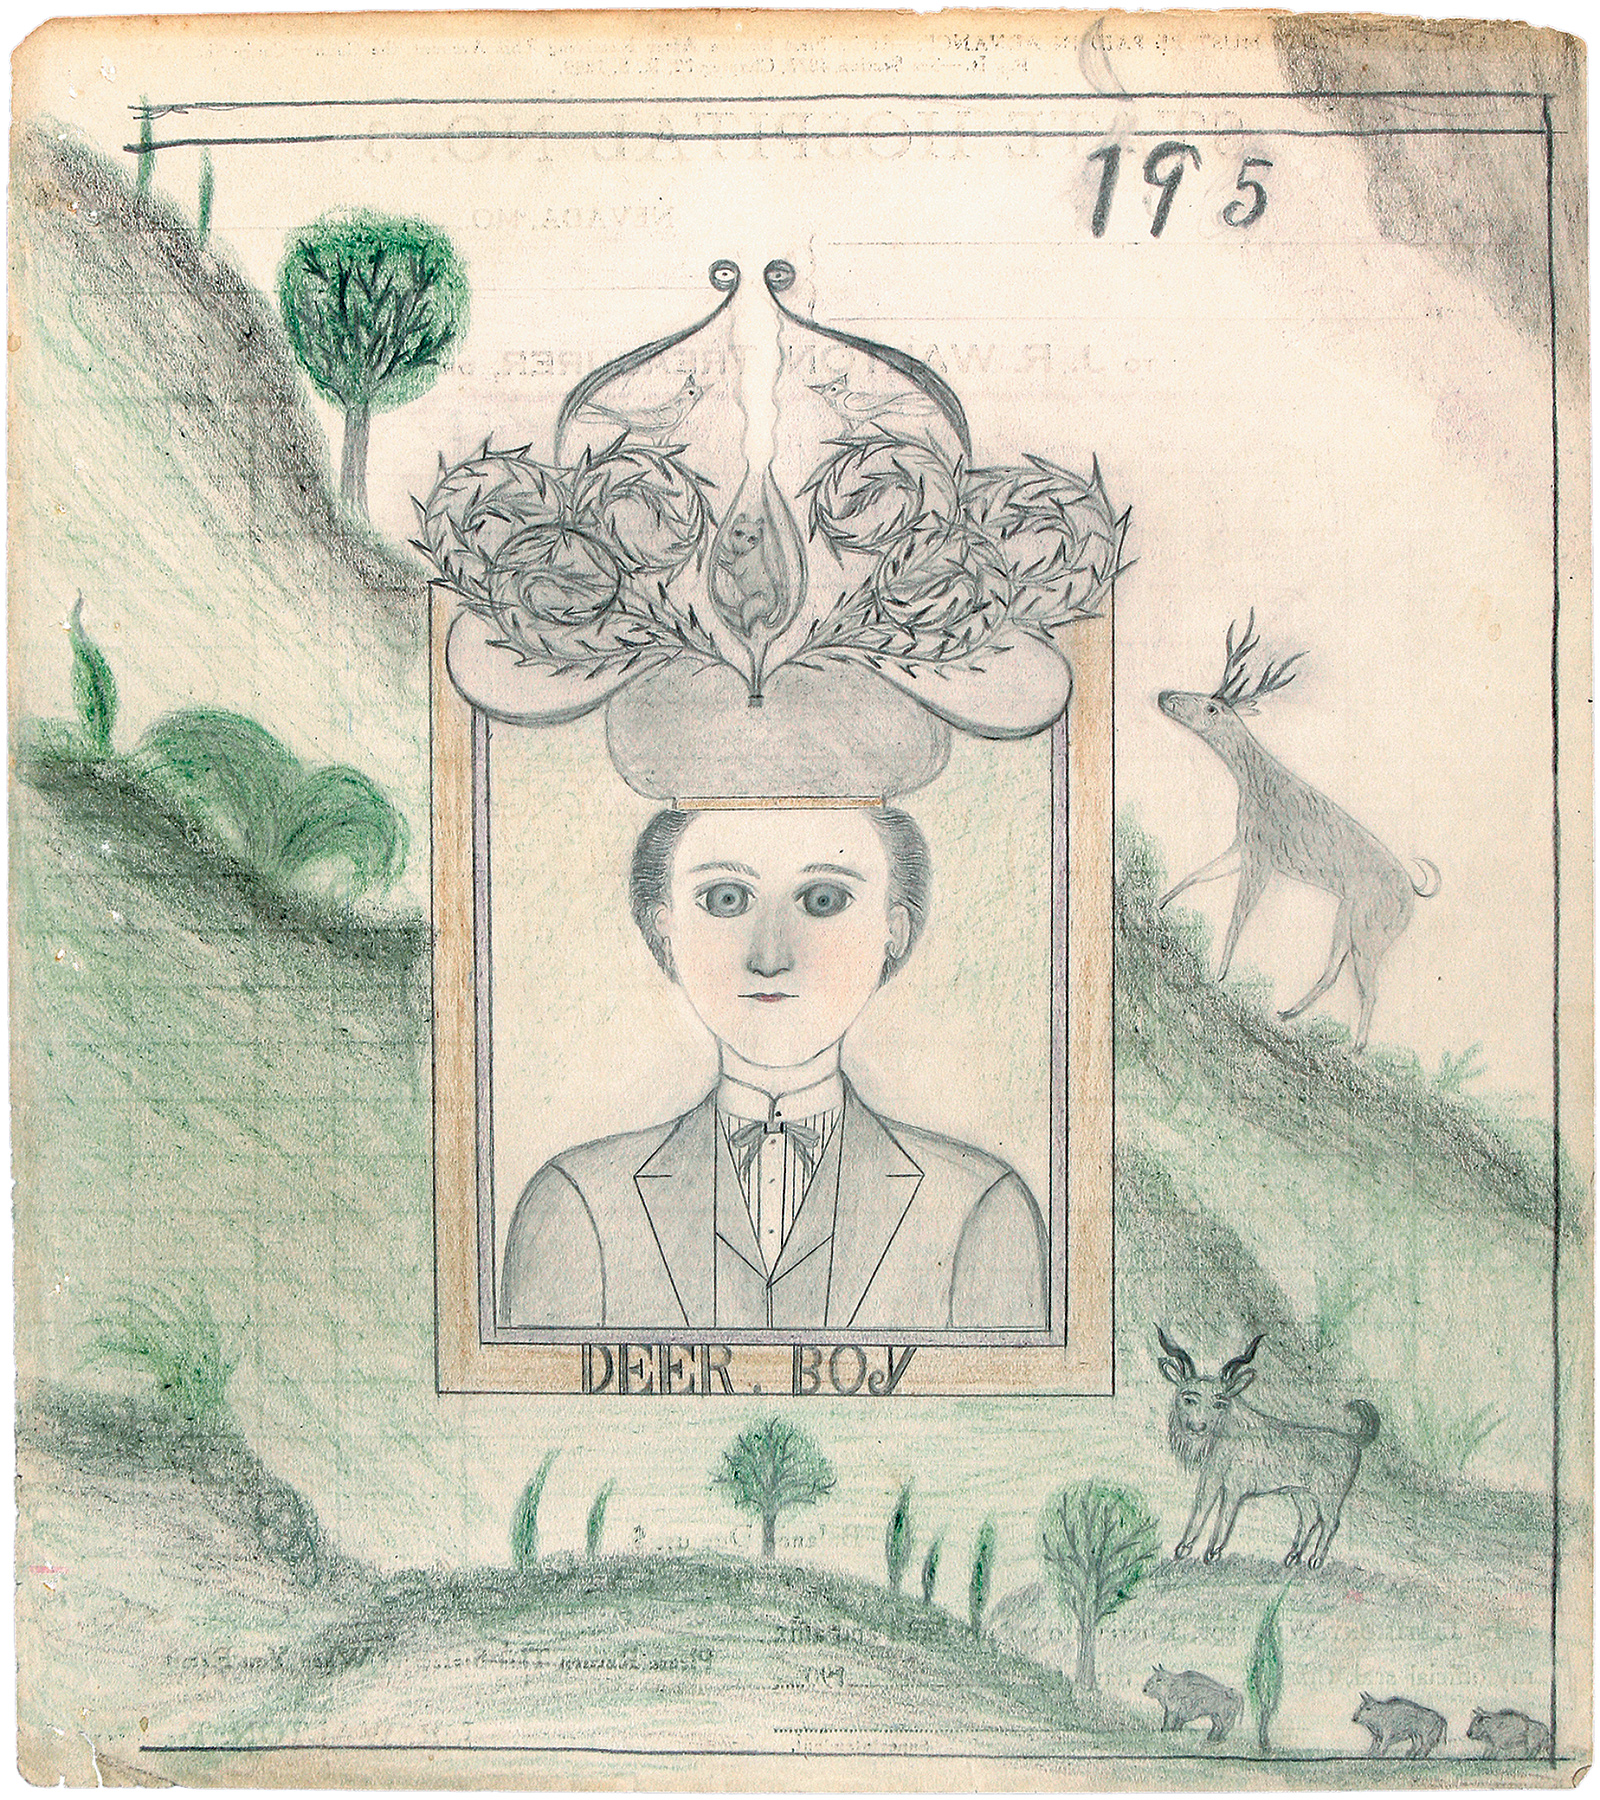 ‘Deer, Boy’; drawing by James Edward Deeds Jr. from an album of nearly three hundred drawings that he made during his thirty-seven years as an inmate at a psychiatric hospital in Nevada, Missouri, starting in 1936. The drawings are collected in The Electric Pencil: Drawings from Inside State Hospital No. 3, with an introduction by Richard Goodman and a foreword by Harris Diamant, just published by Princeton Architectural Press. 